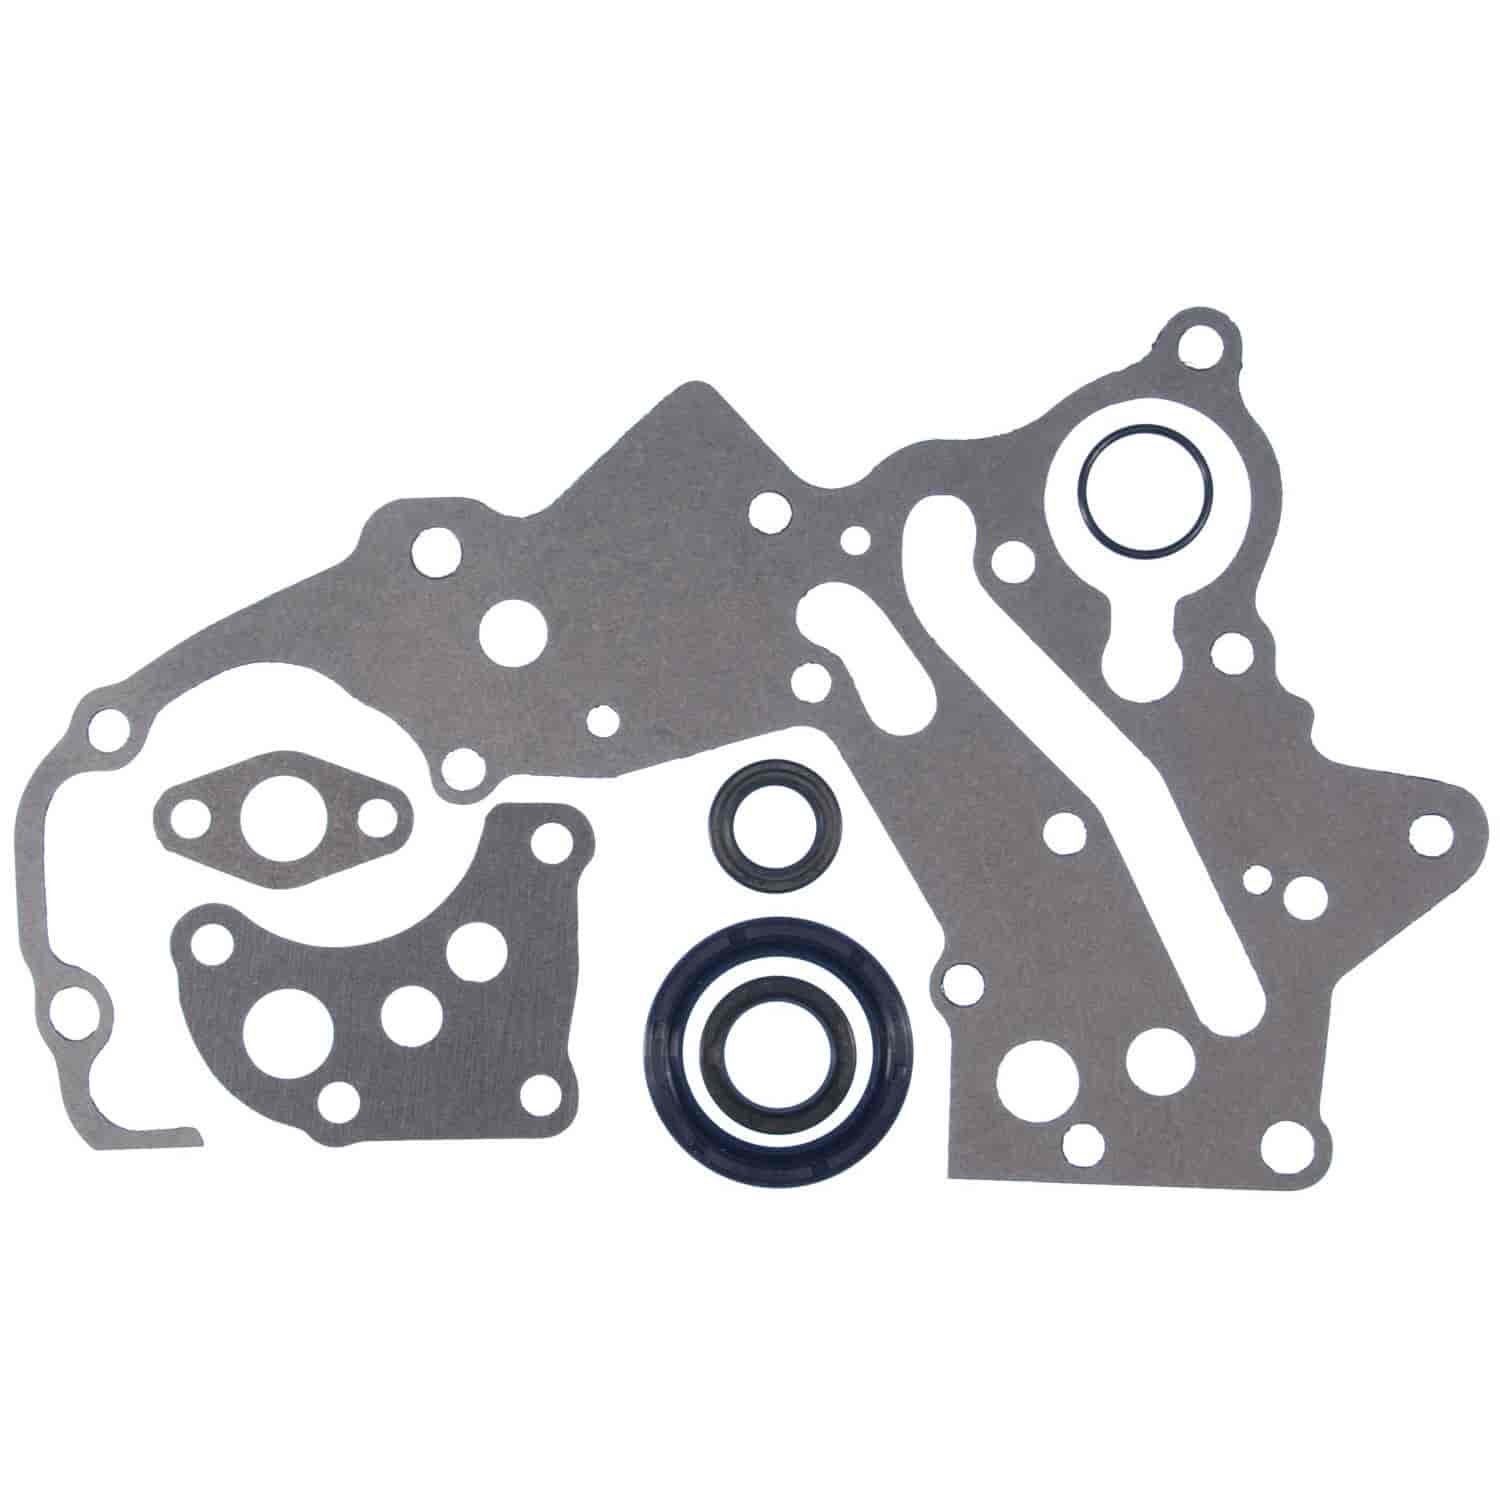 Timing Cover Set Chry Dod-Pass&Trk Eagle for Hyundai